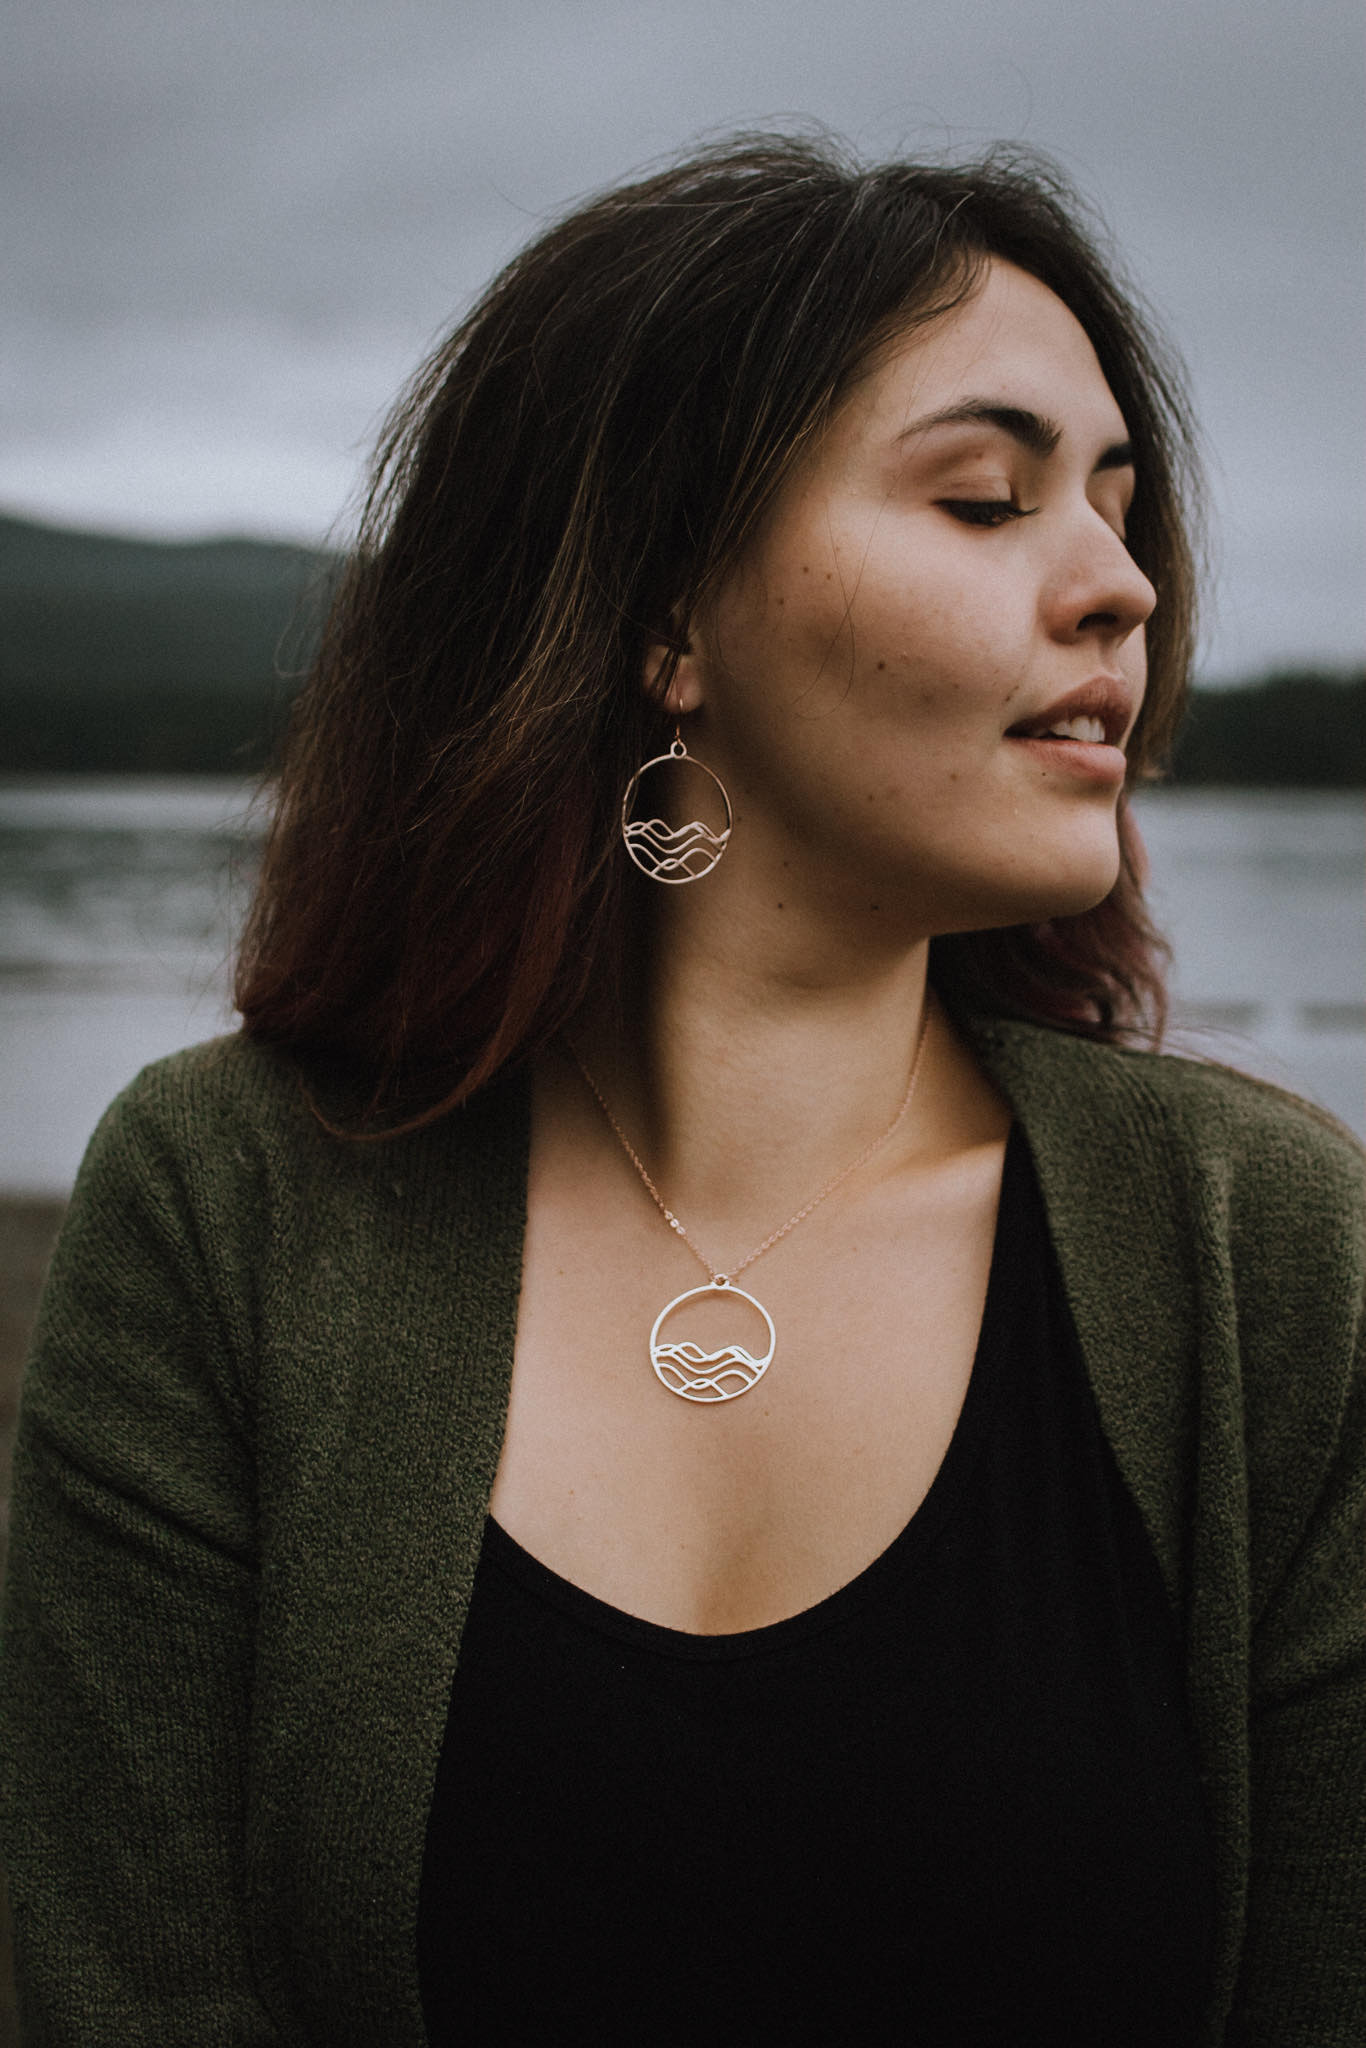 ocean jewelry, Model showing 18k plated rose gold high tide circle earrings and necklace with lake background